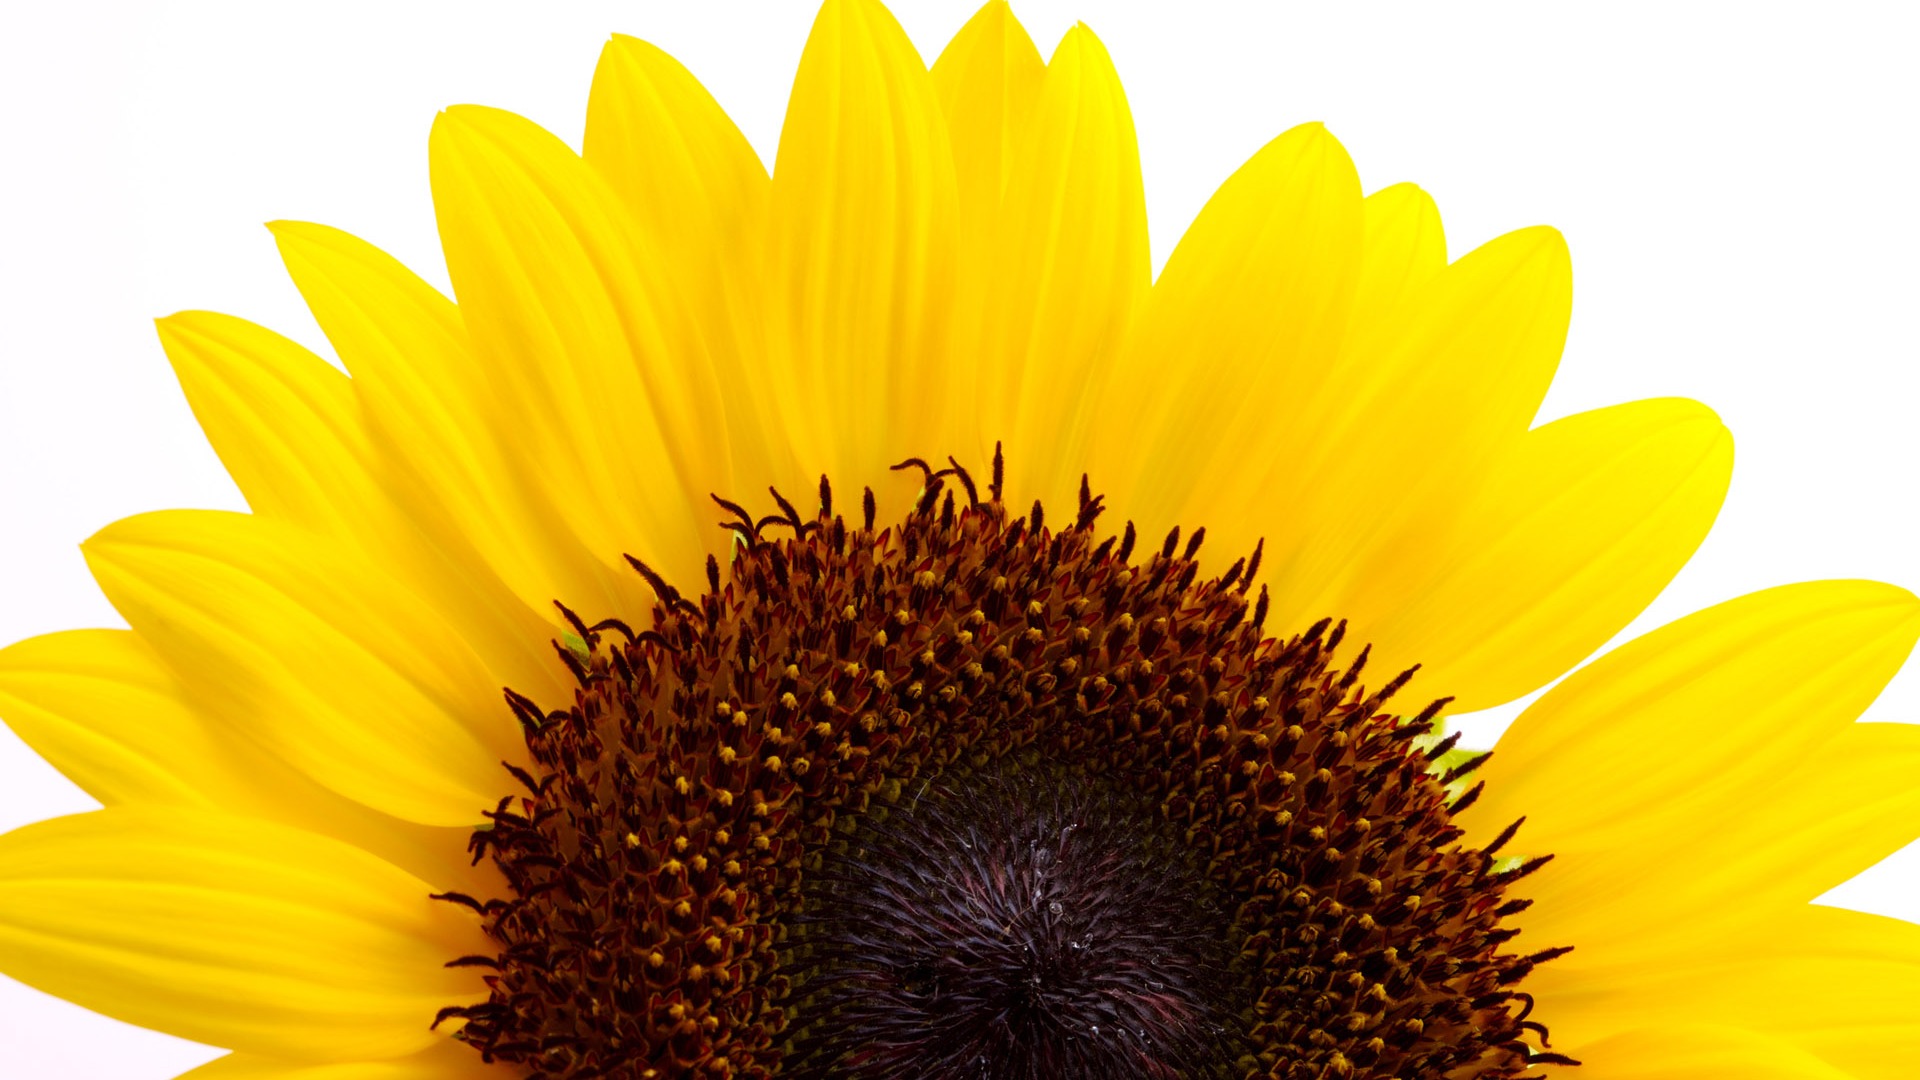 Sunny sunflower photo HD Wallpapers #18 - 1920x1080